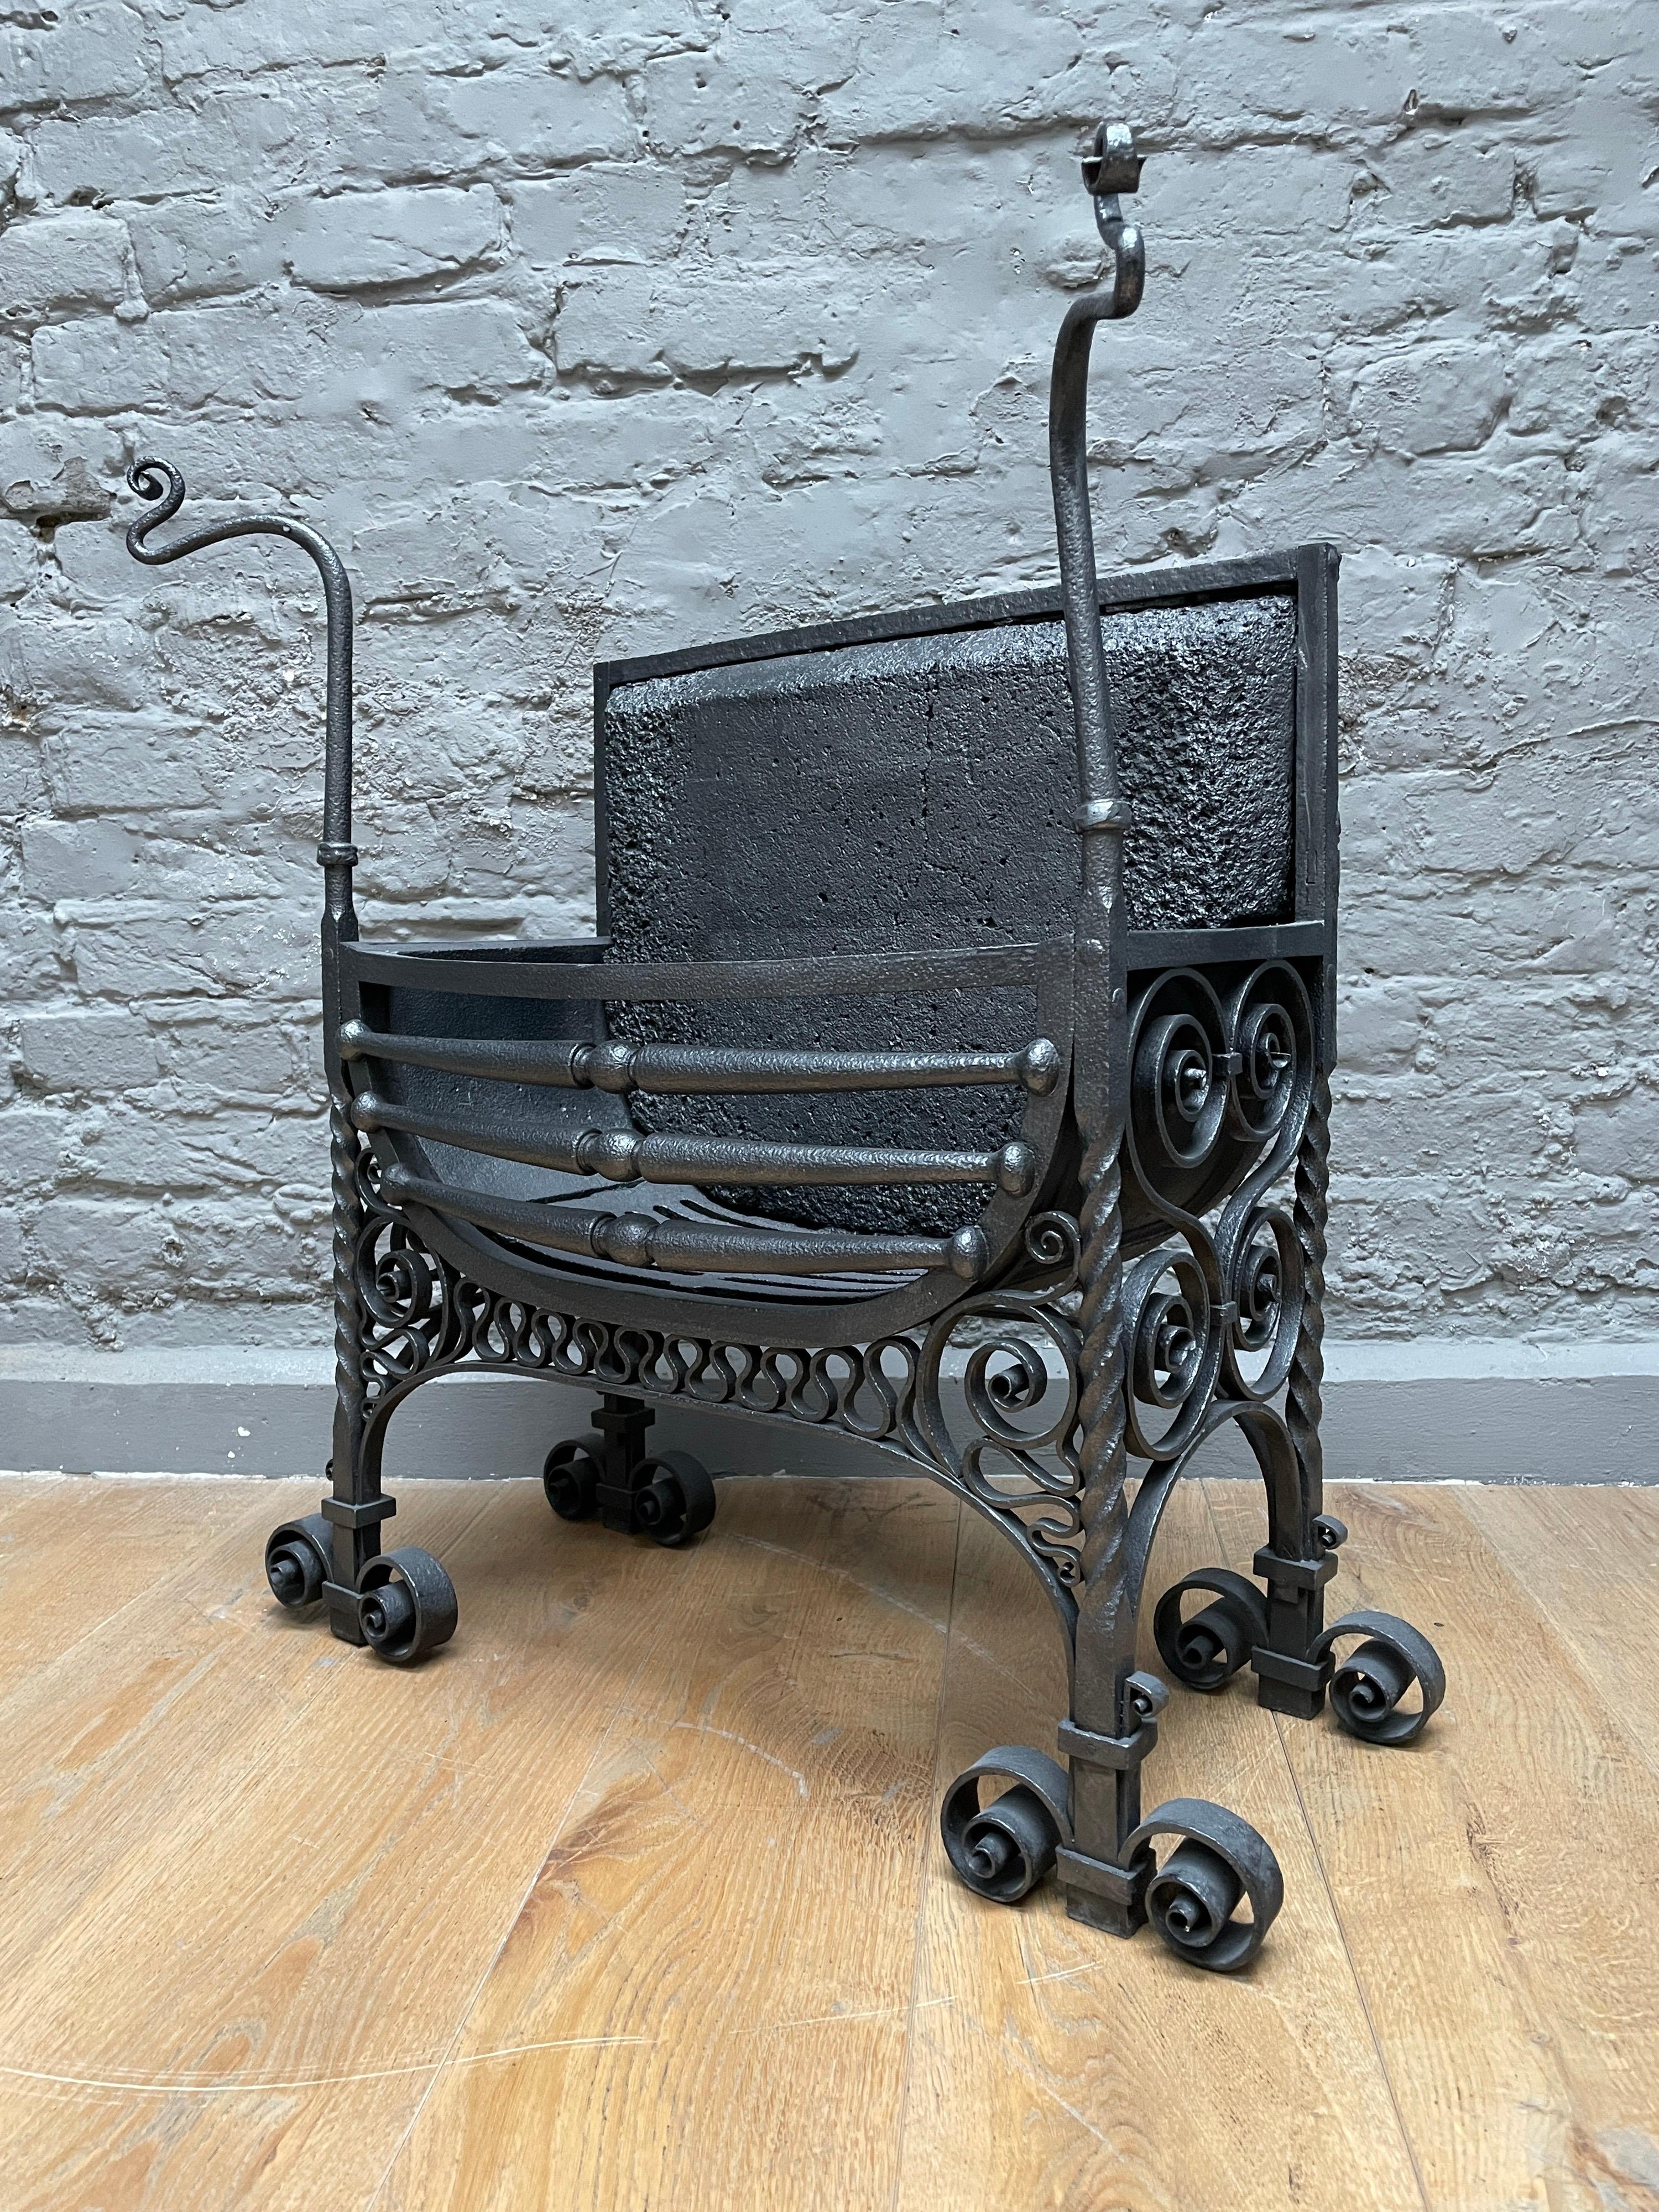 A finely worked wrought Iron fire grate from the Arts & Crafts period, extensive scroll detail with framed fire brick back.